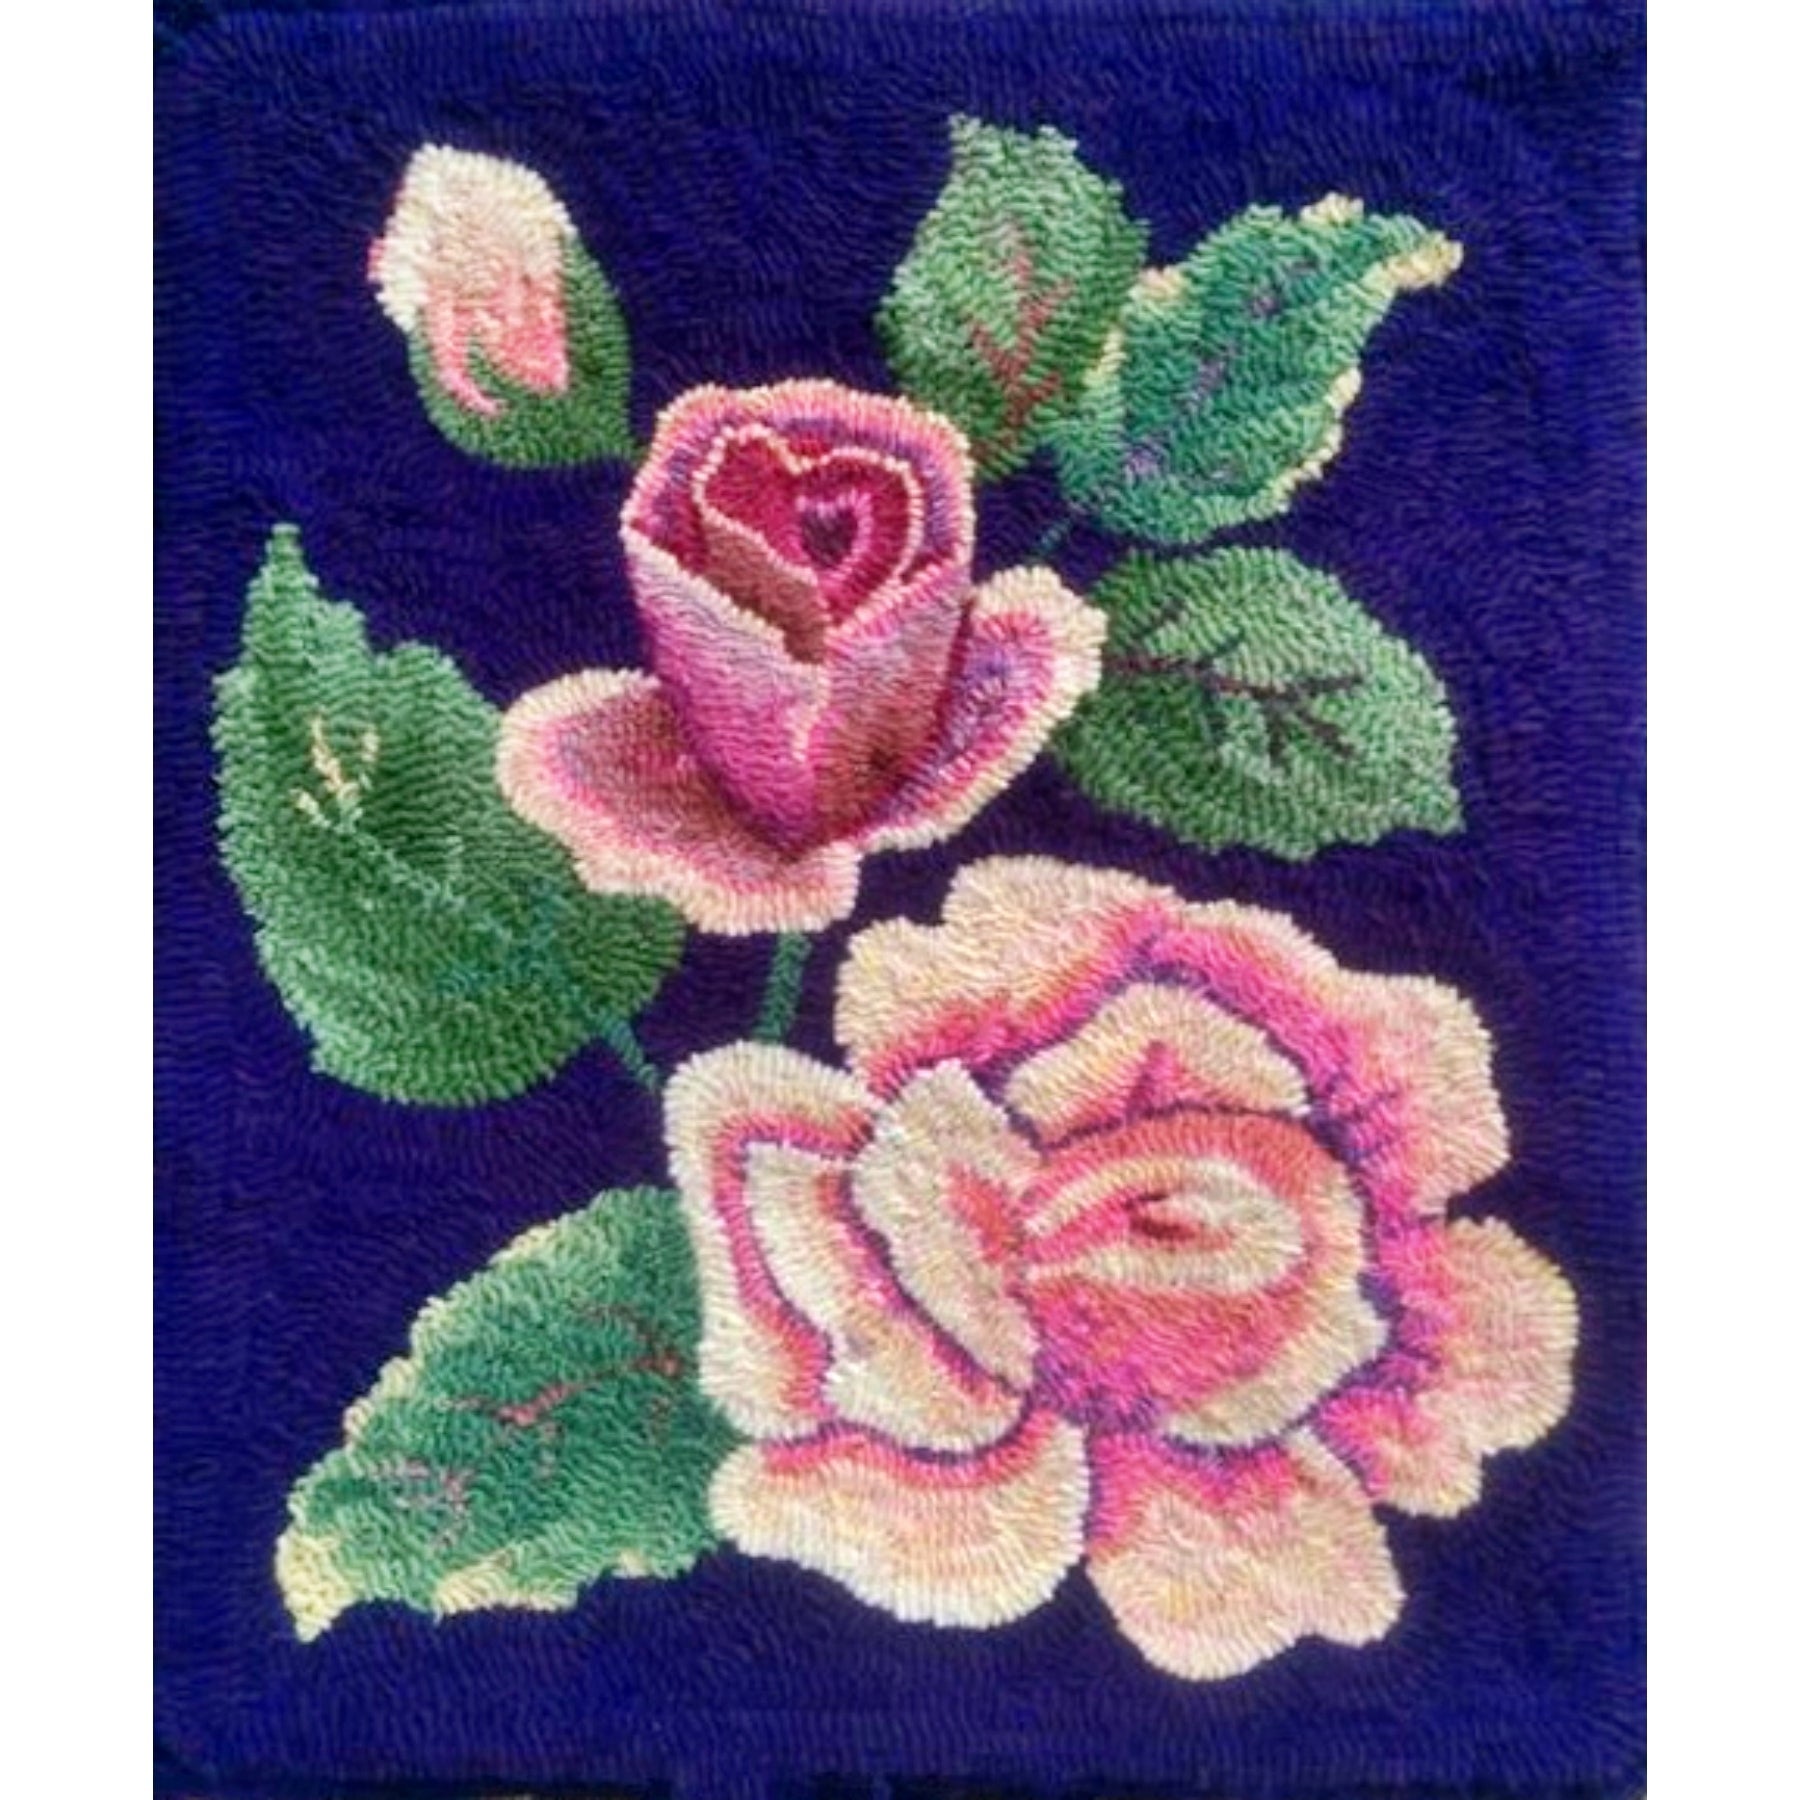 Rose, rug hooked by Connie Bradley (adapt.)